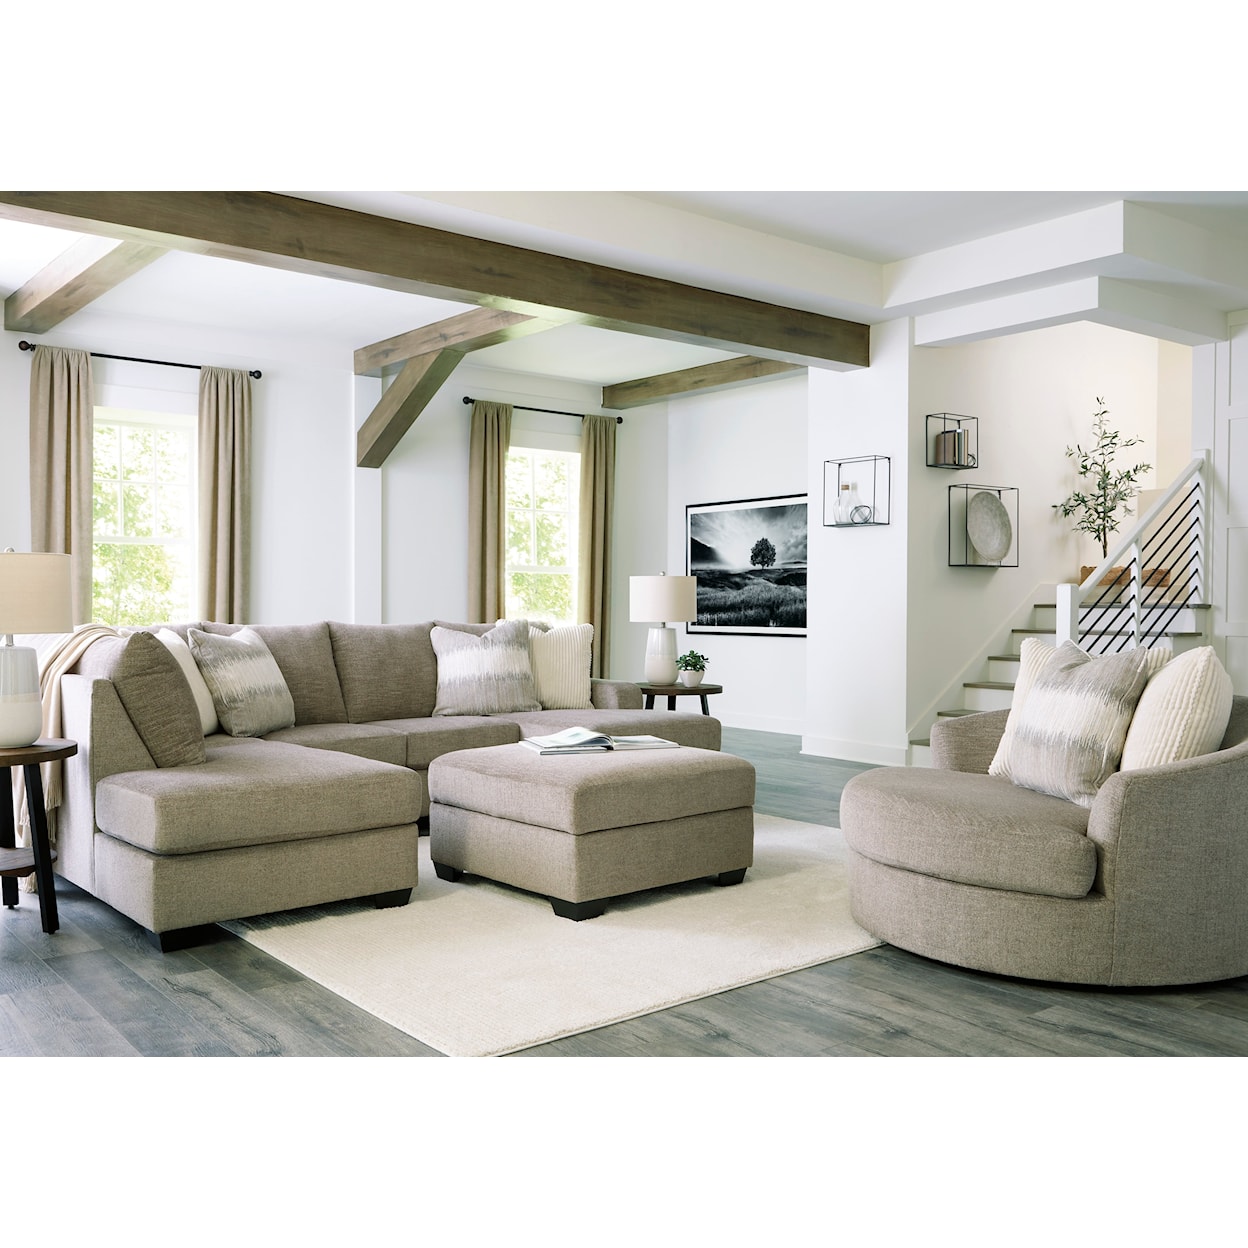 Signature Design by Ashley Creswell Living Room Set